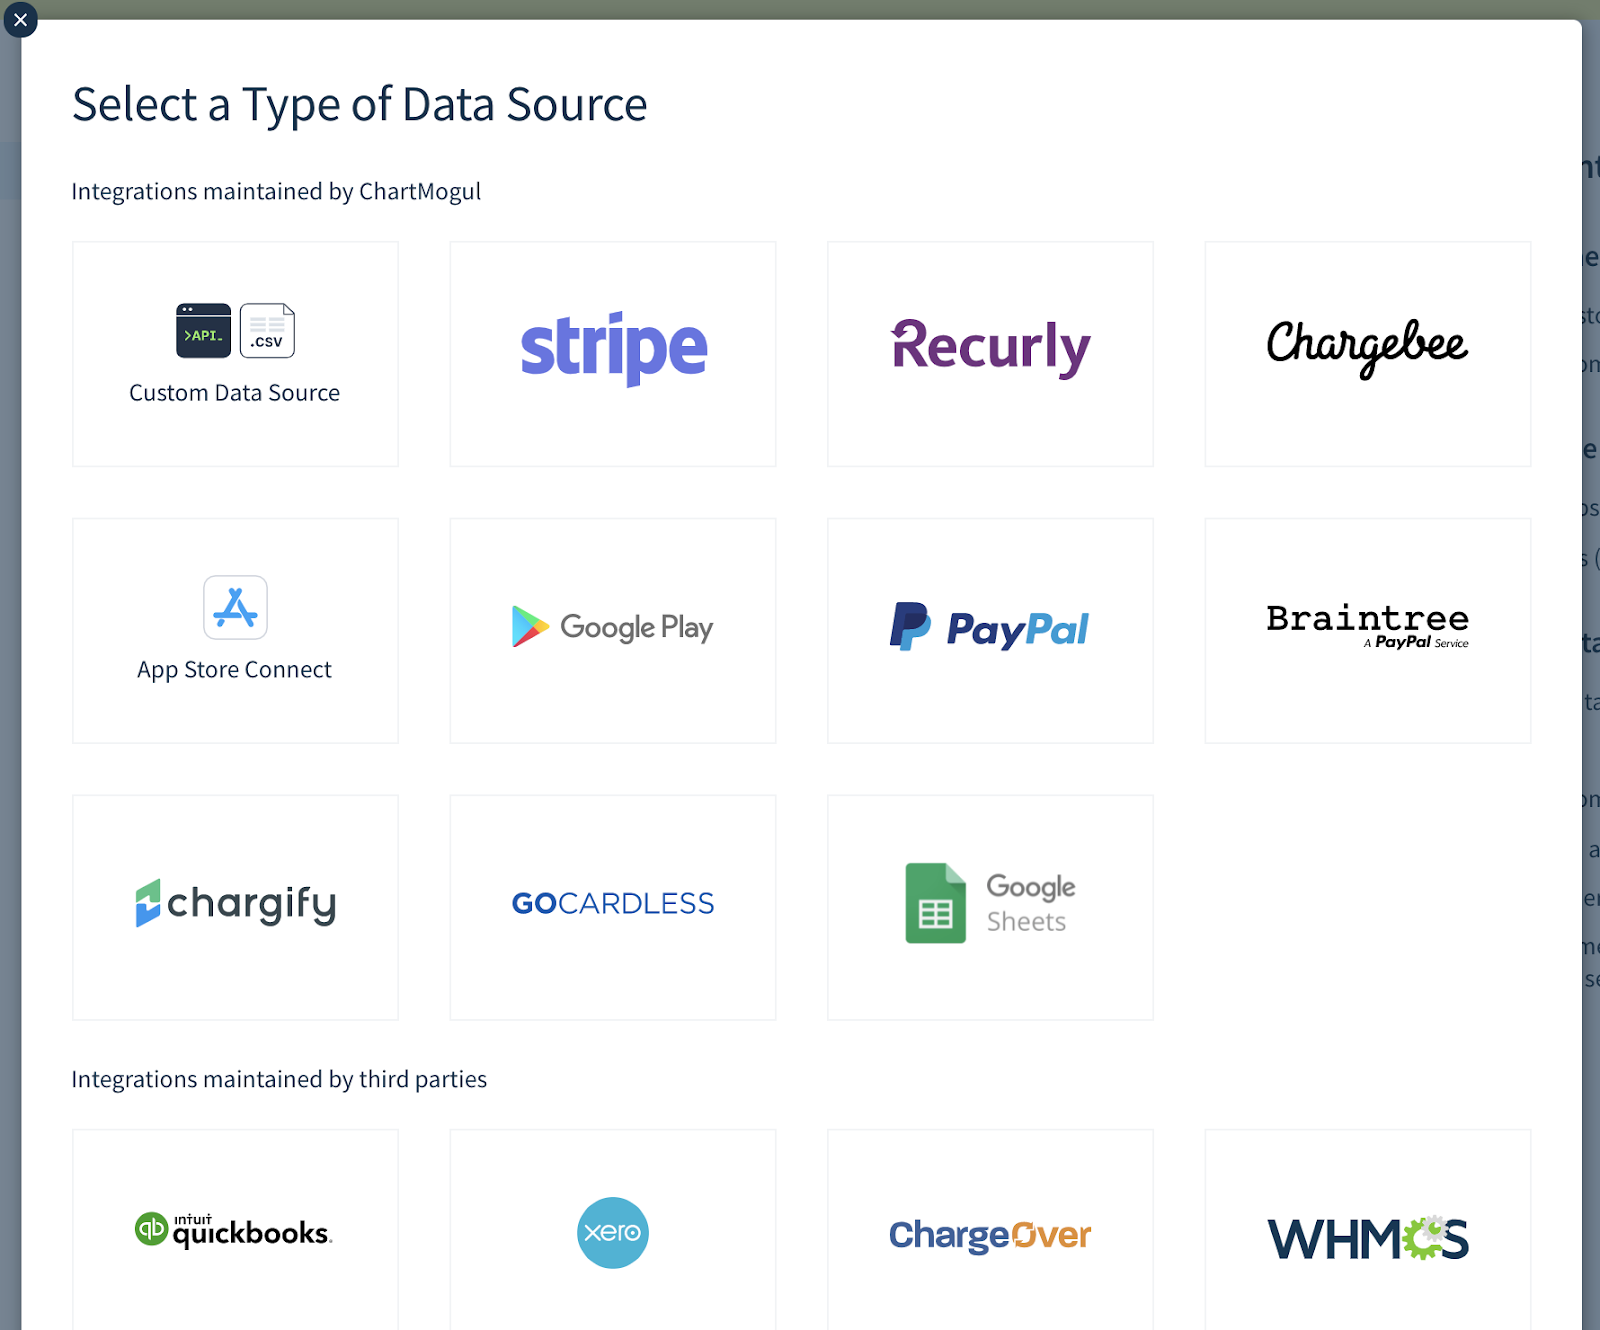 Screenshot of showing the list of data sources available in ChartMogul